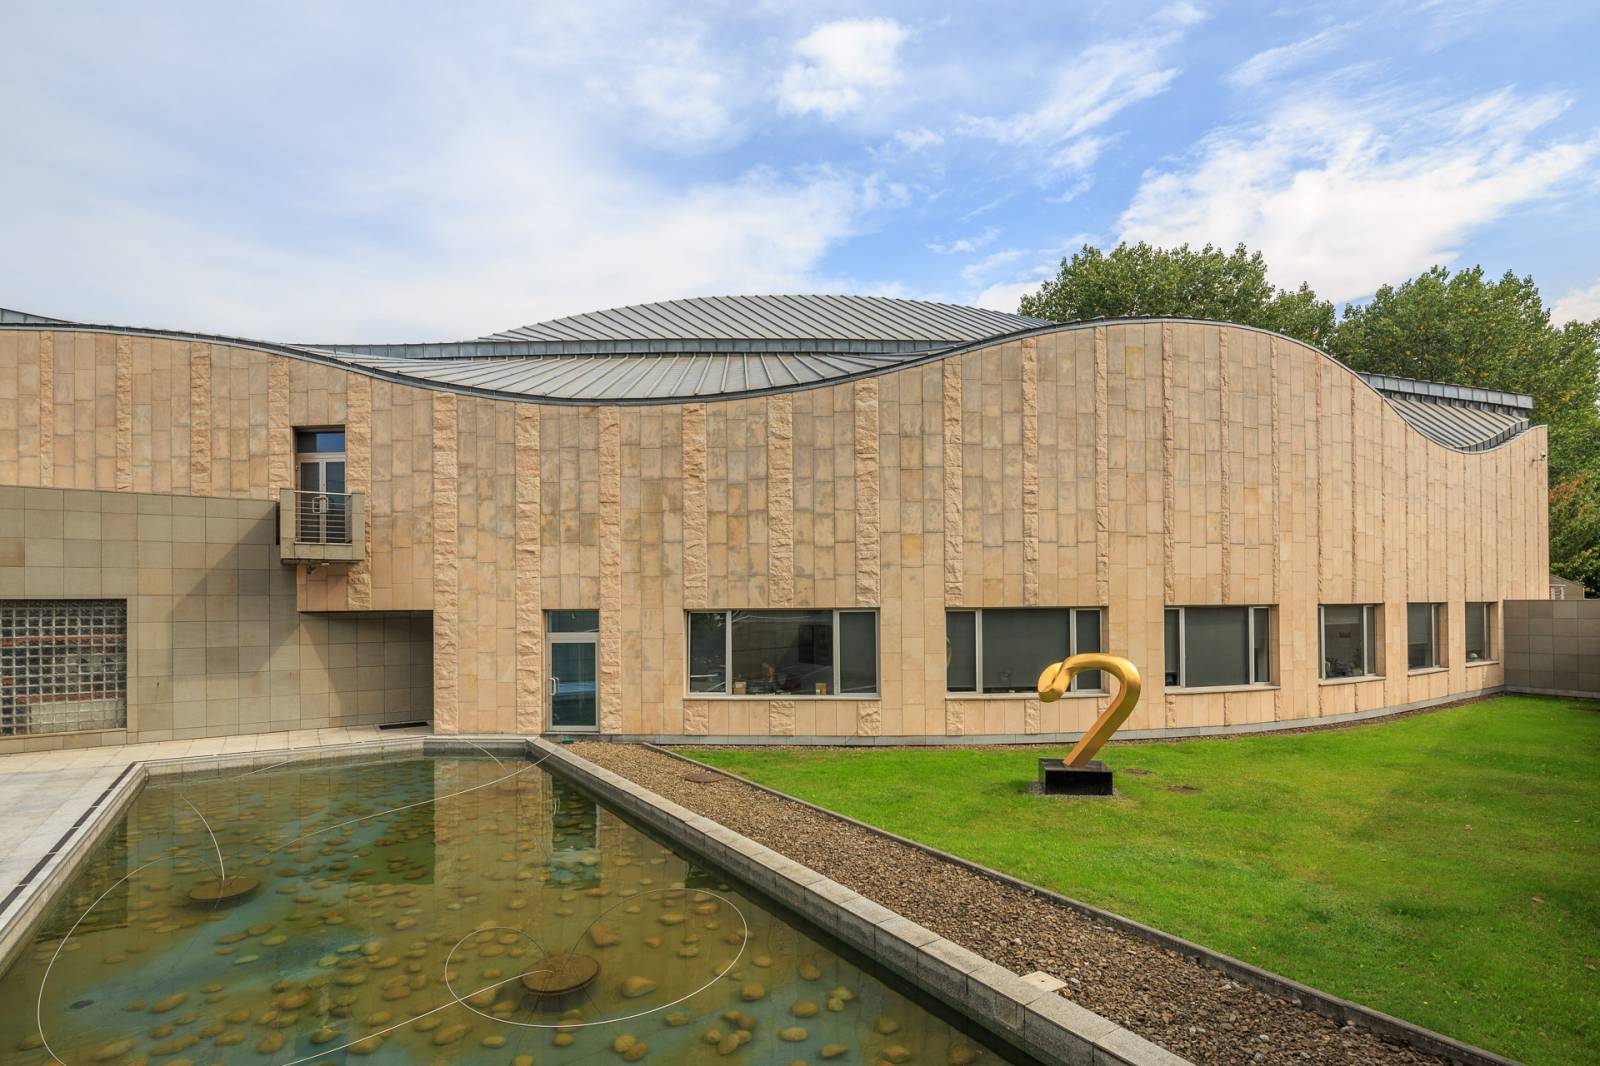 The Manggha Museum of Japanese Art and Technology